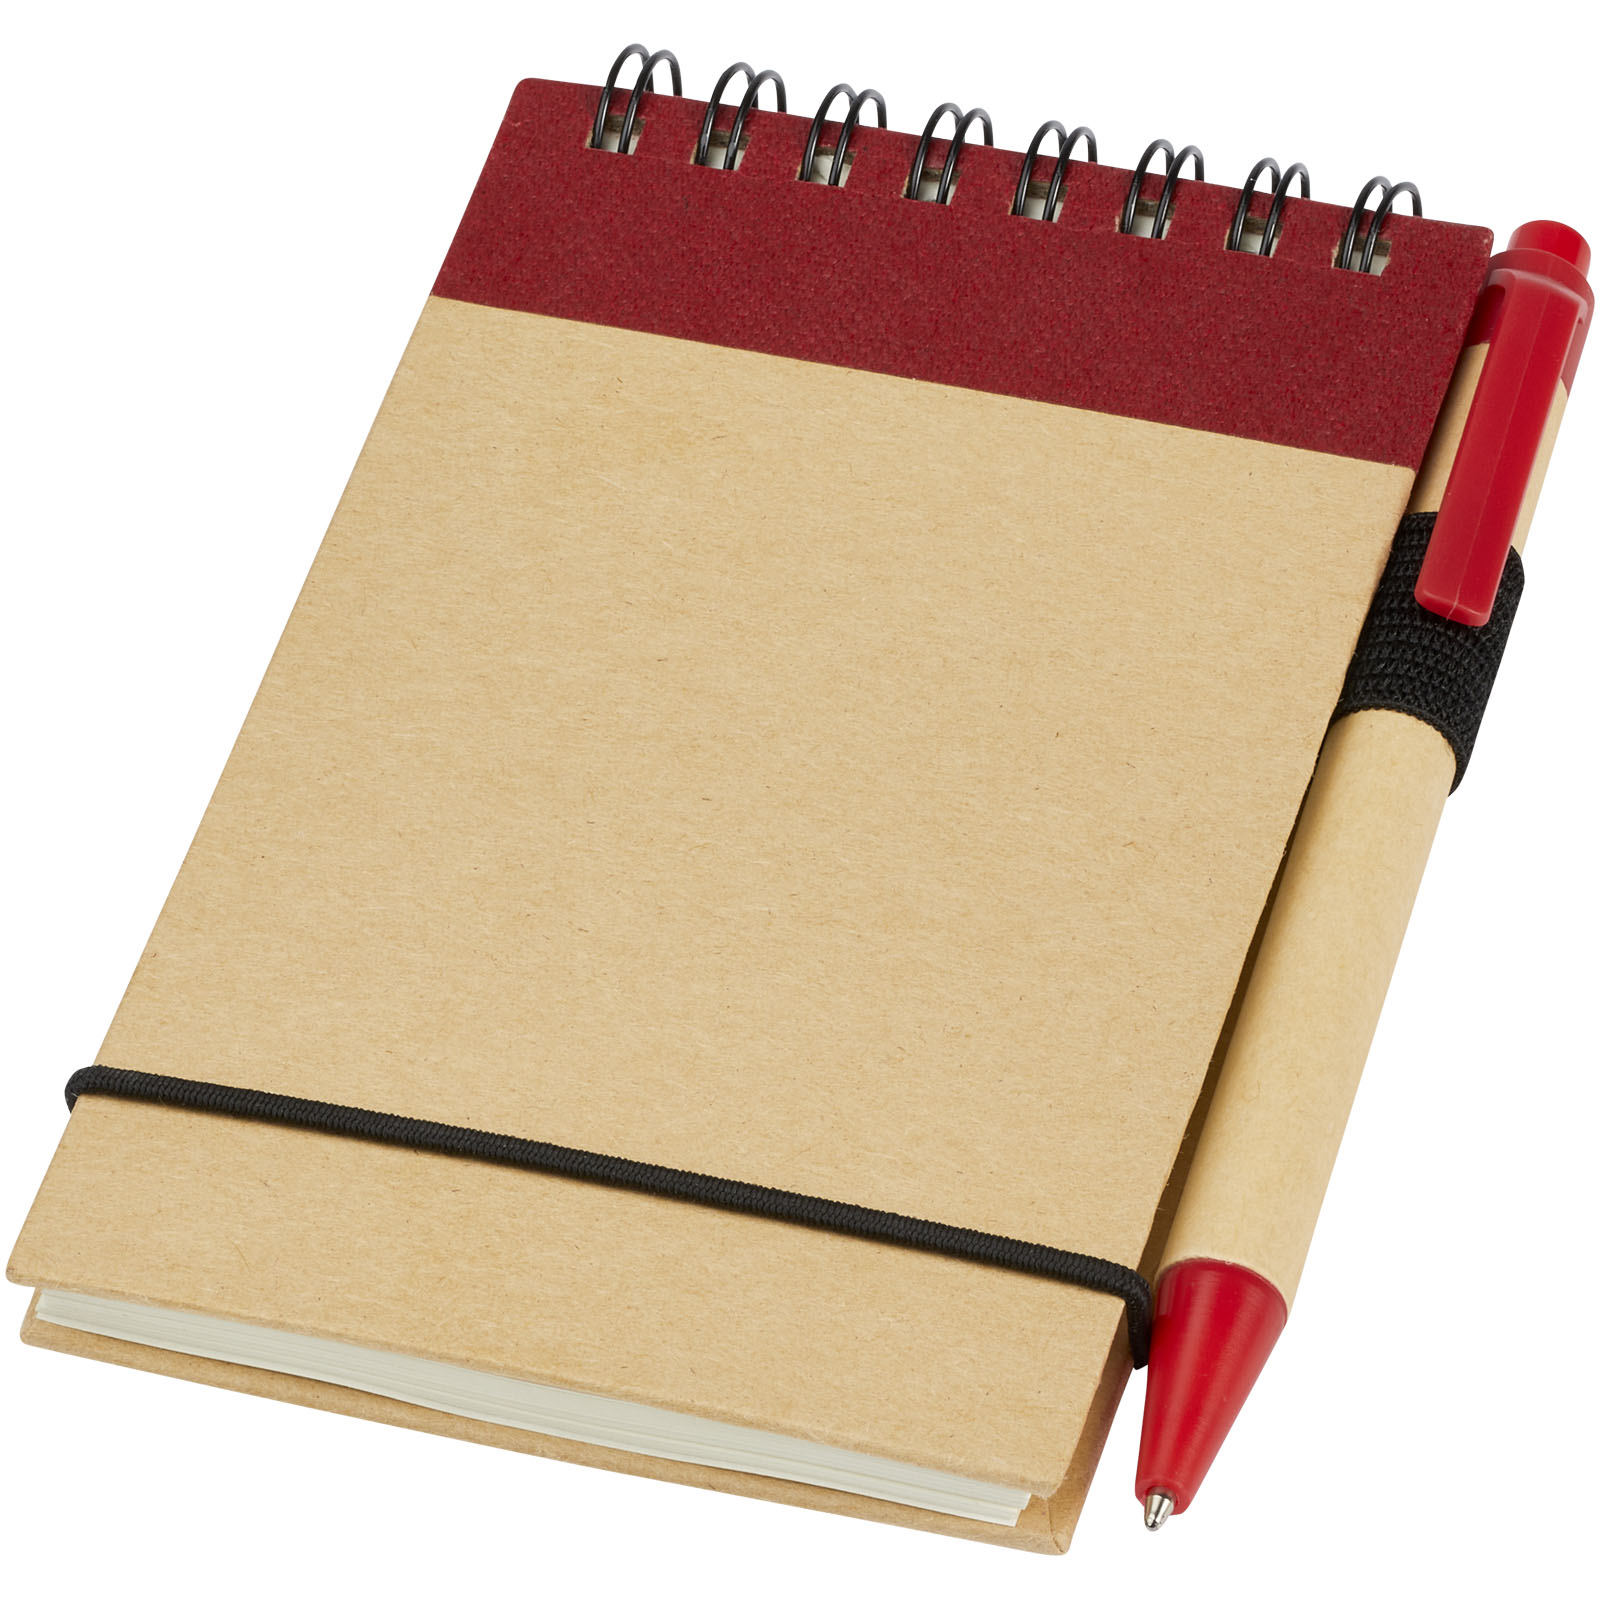 Advertising Hard cover notebooks - Zuse A7 recycled jotter notepad with pen